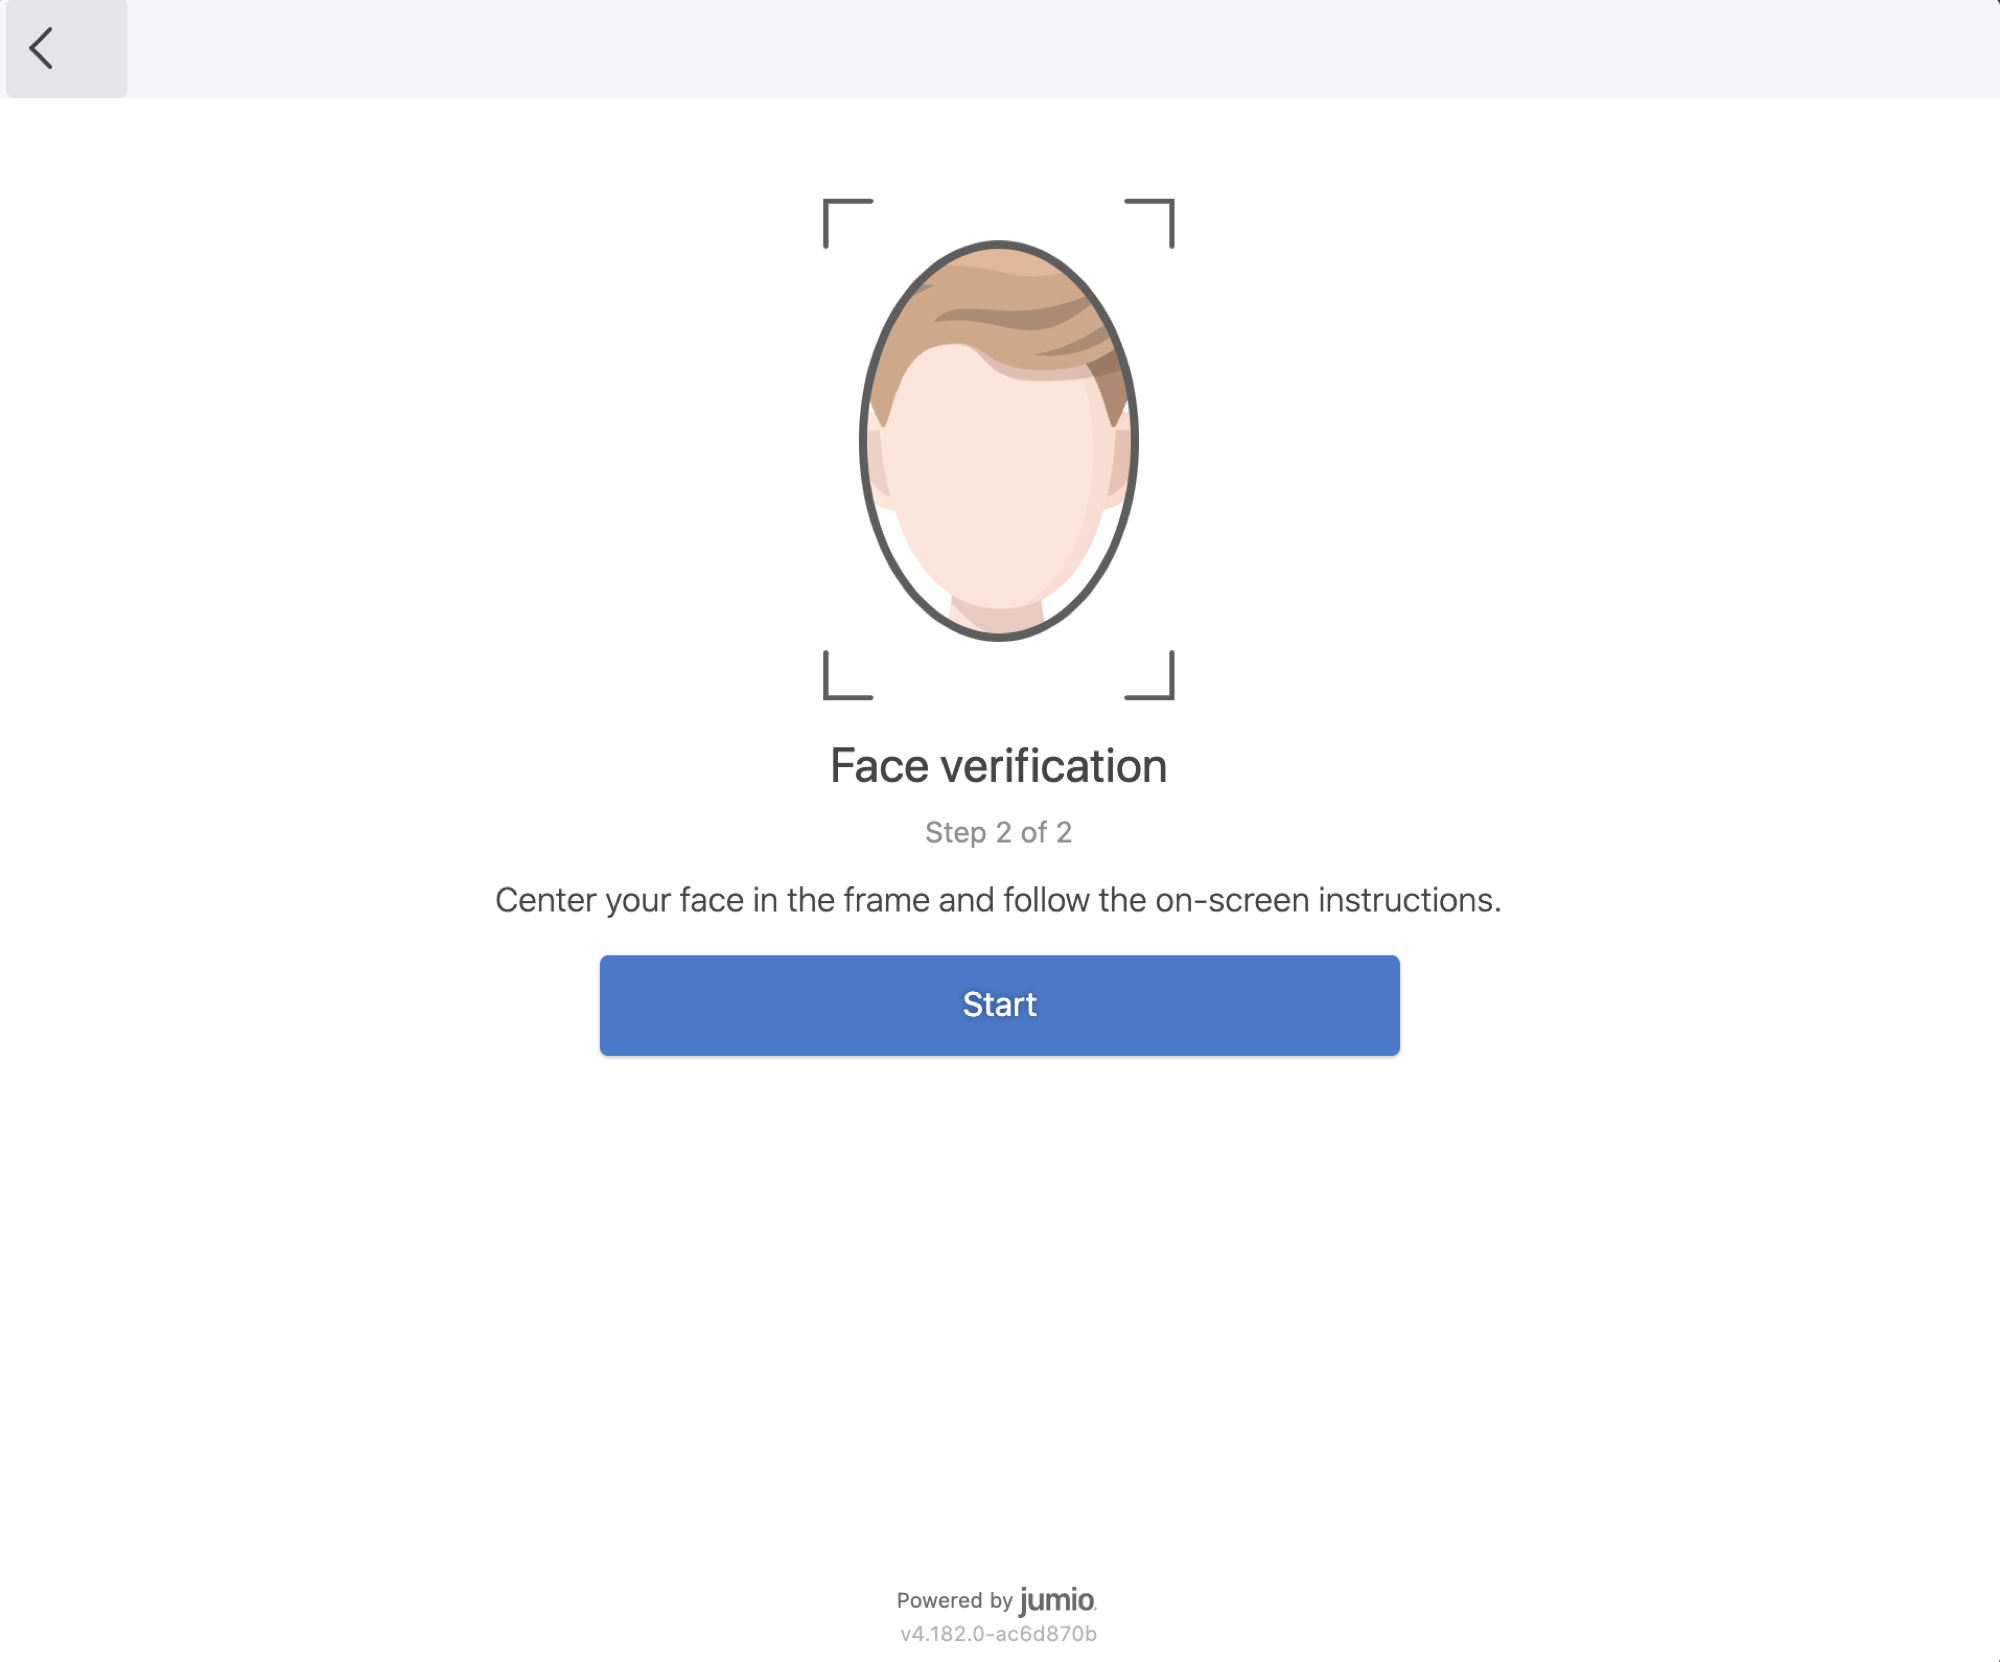 Face verification popup window with oval for selfie